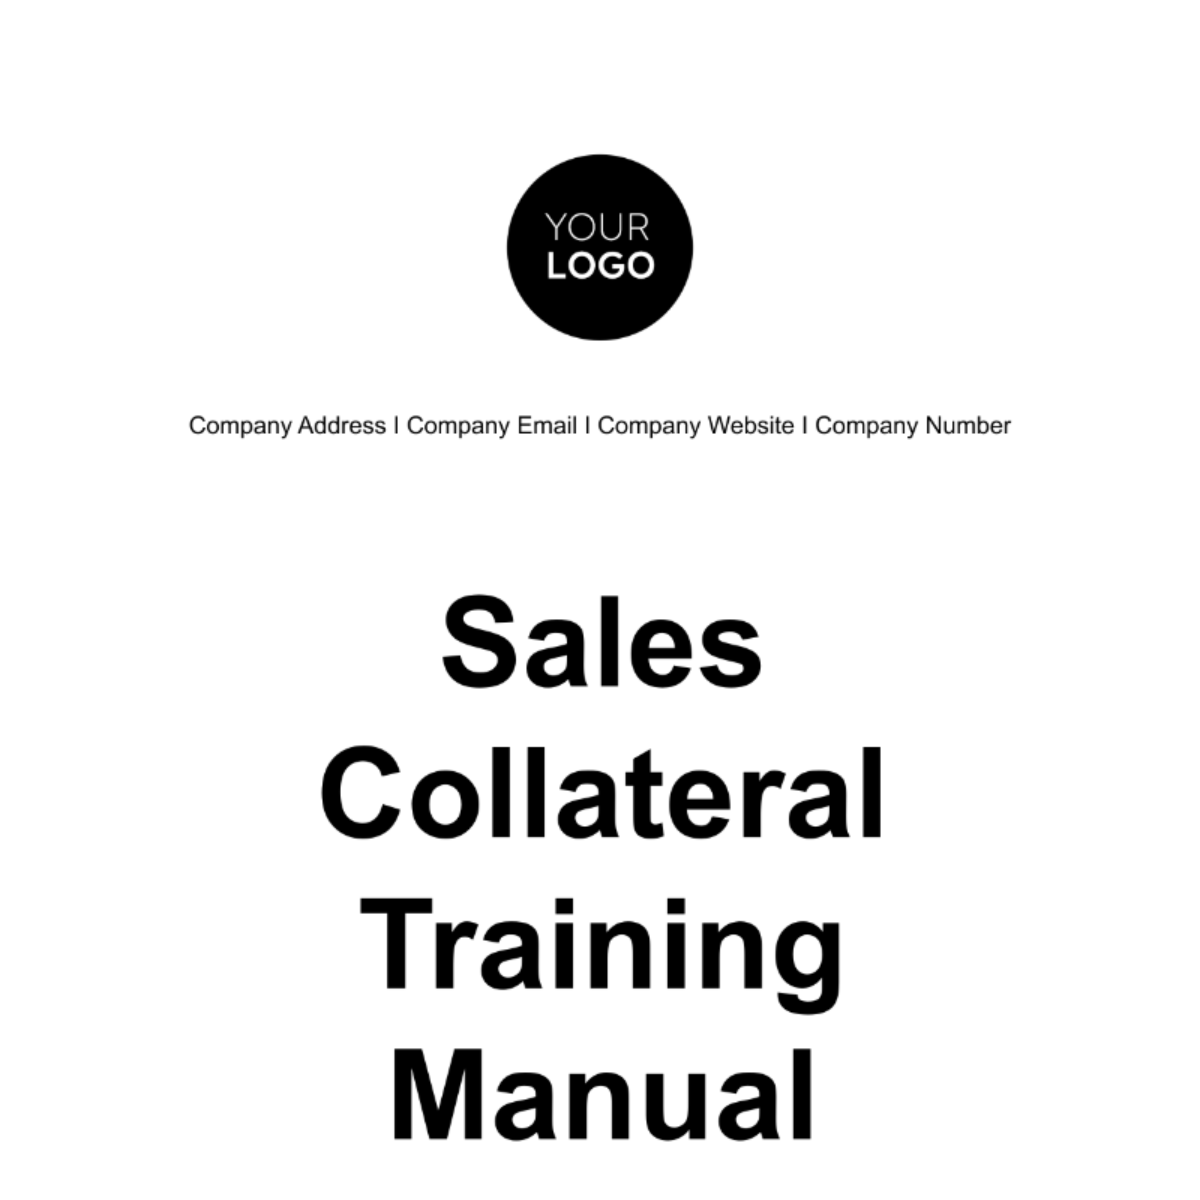 Sales Collateral Training Manual Template